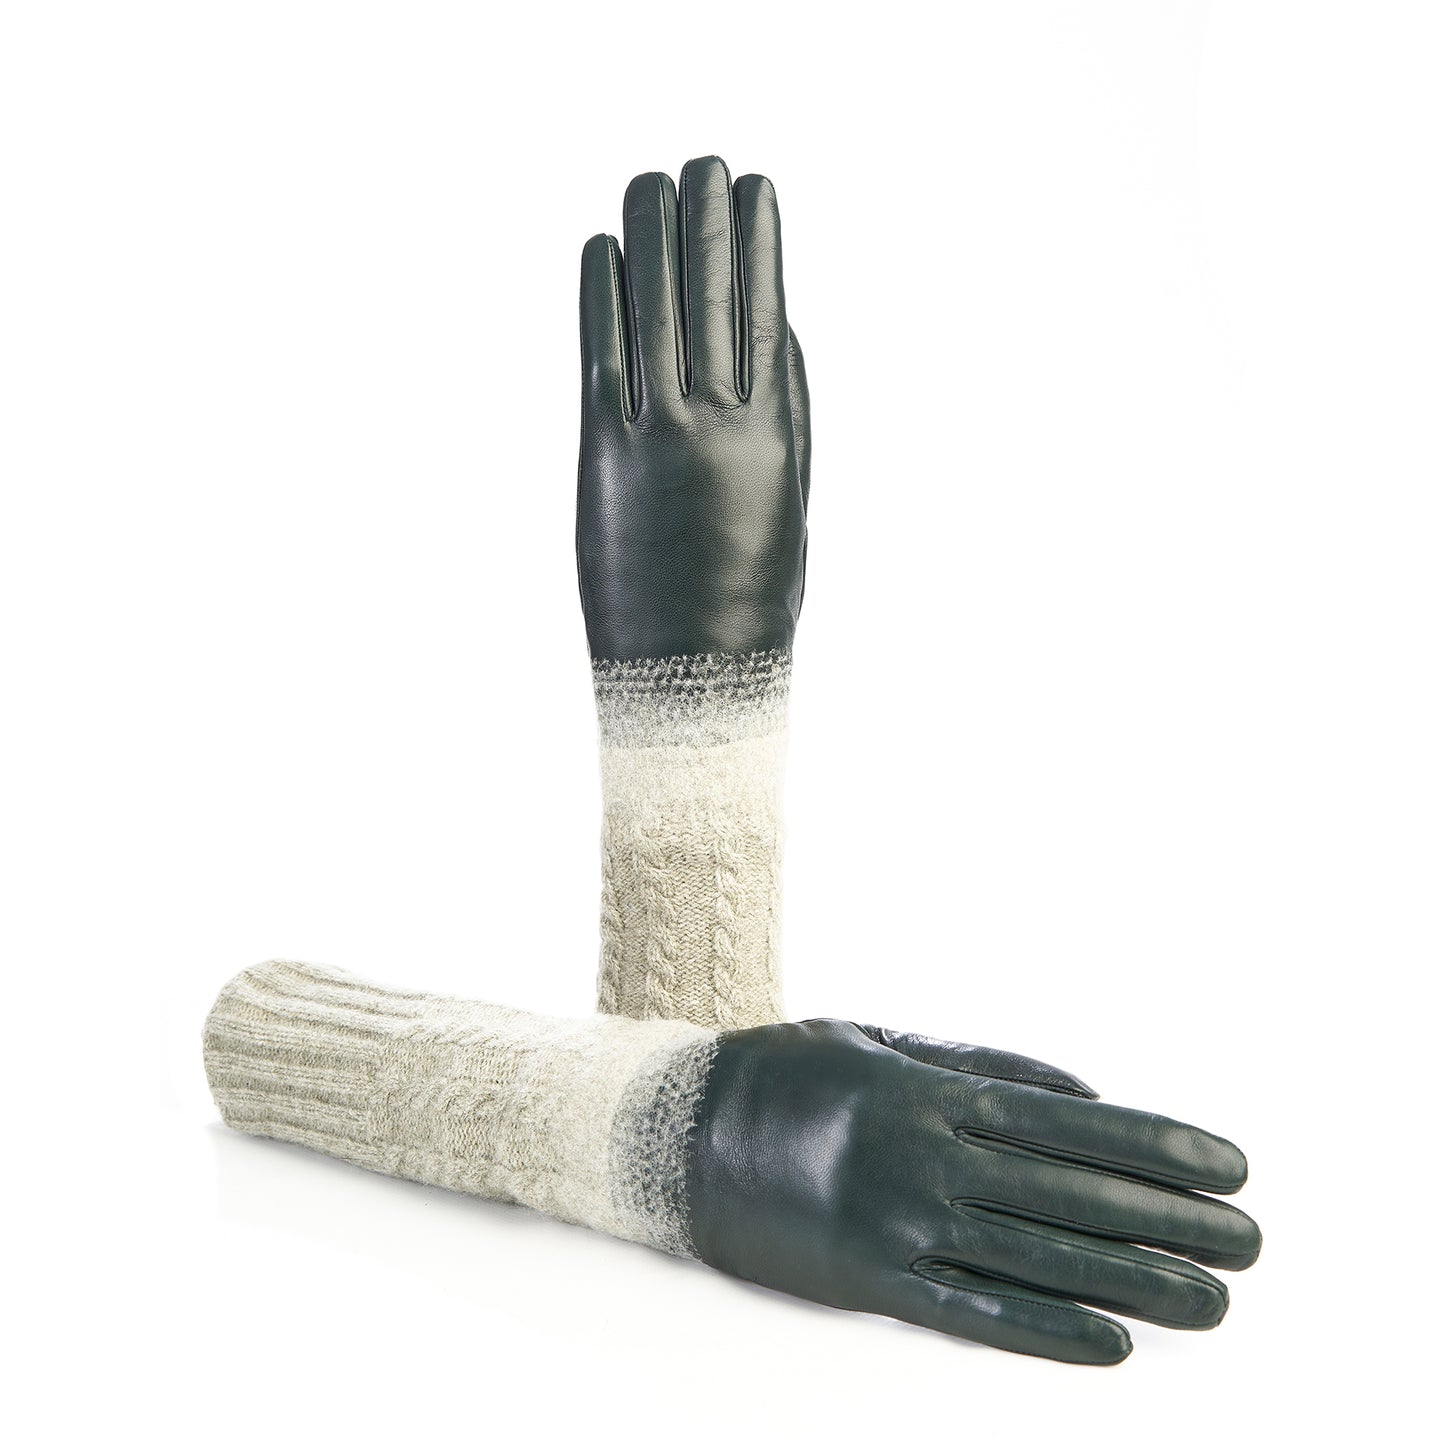 Women's gloves in green nappa leather with wool needle punch details